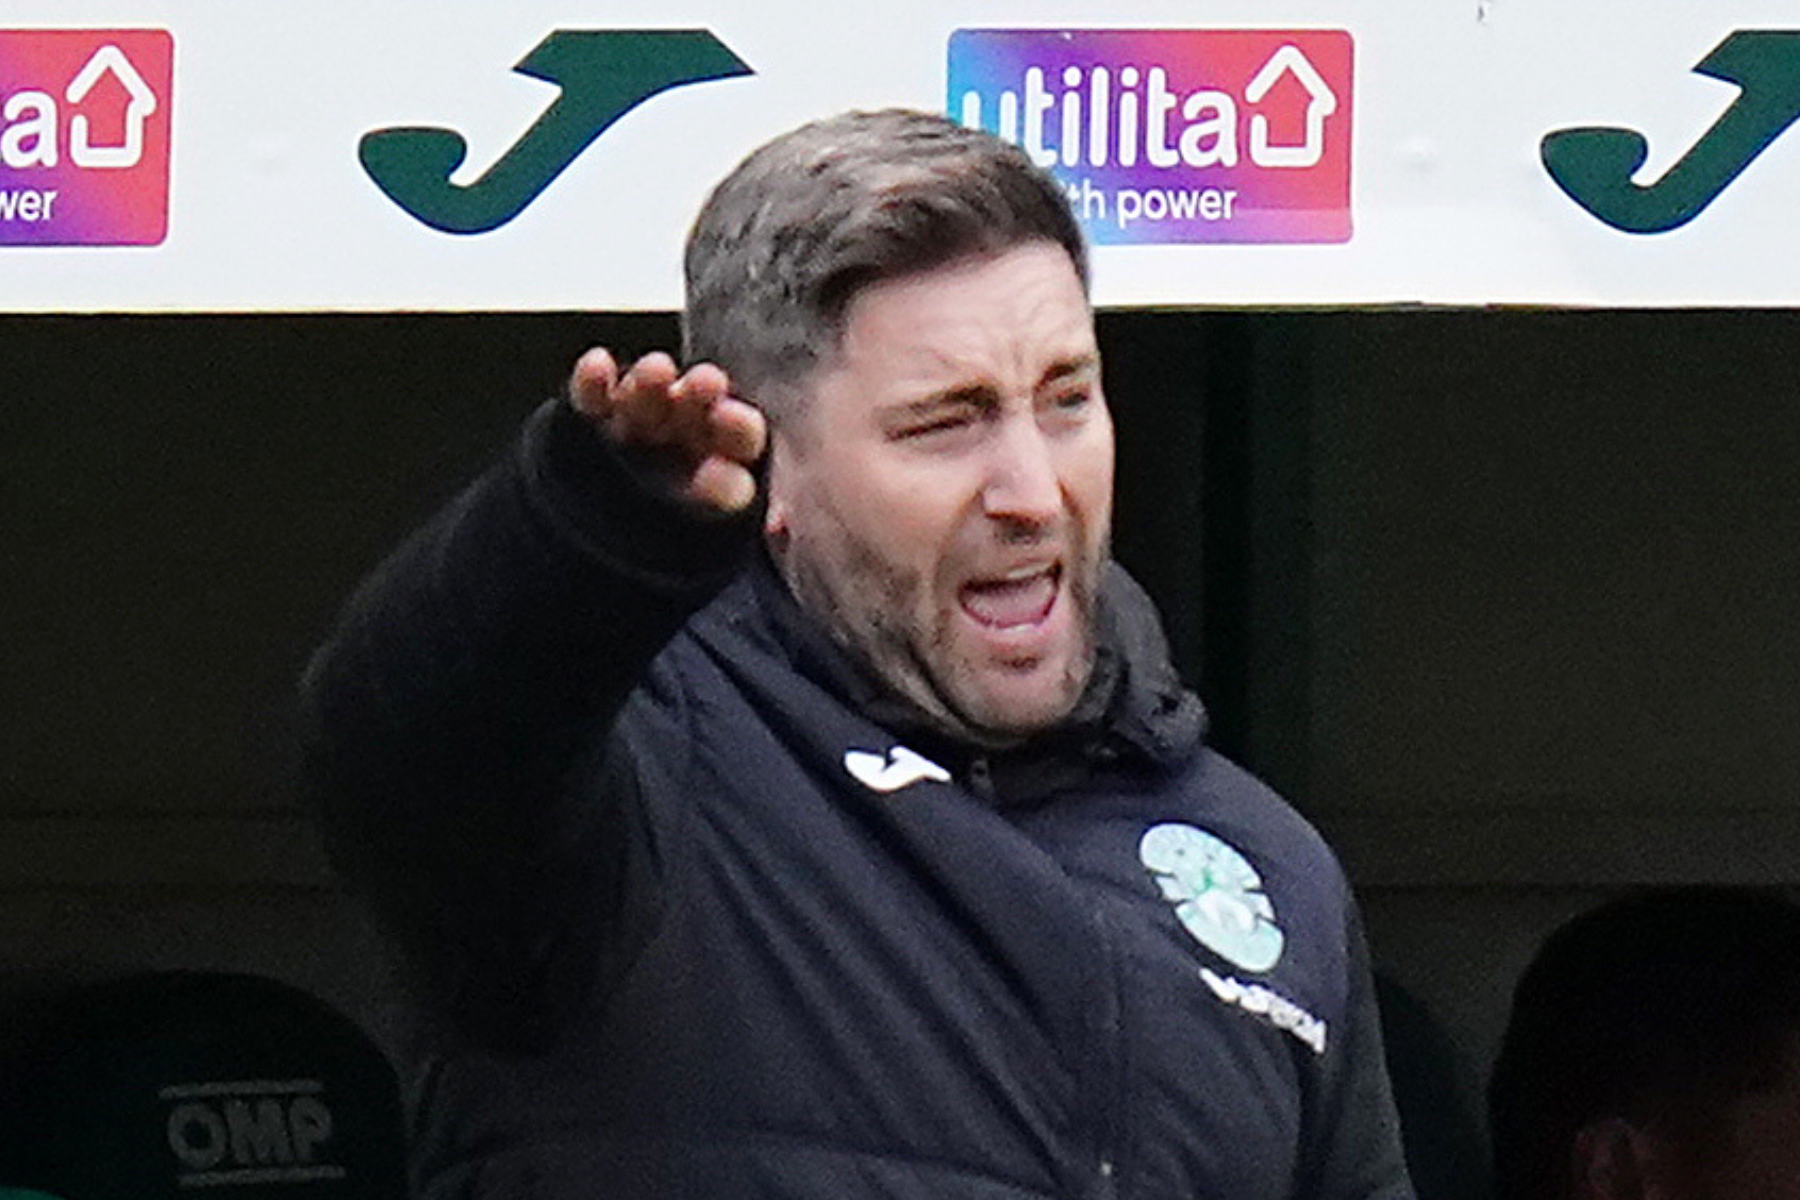 Lee Johnson highlights Hearts marker for Hibs to reach